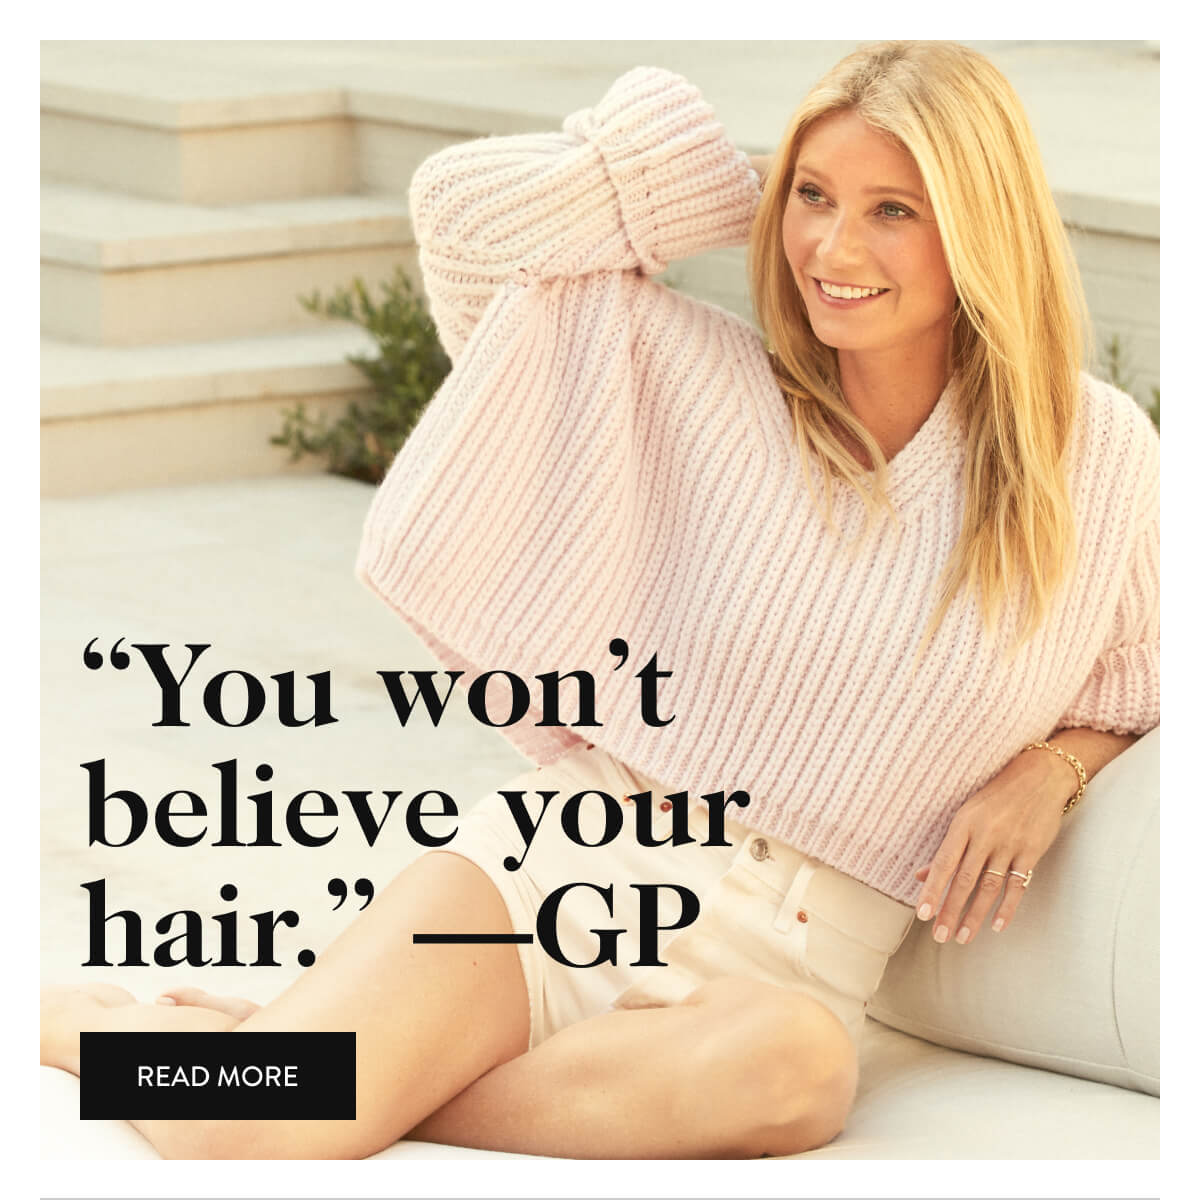 "You won't believe your hair" - GP - Read More